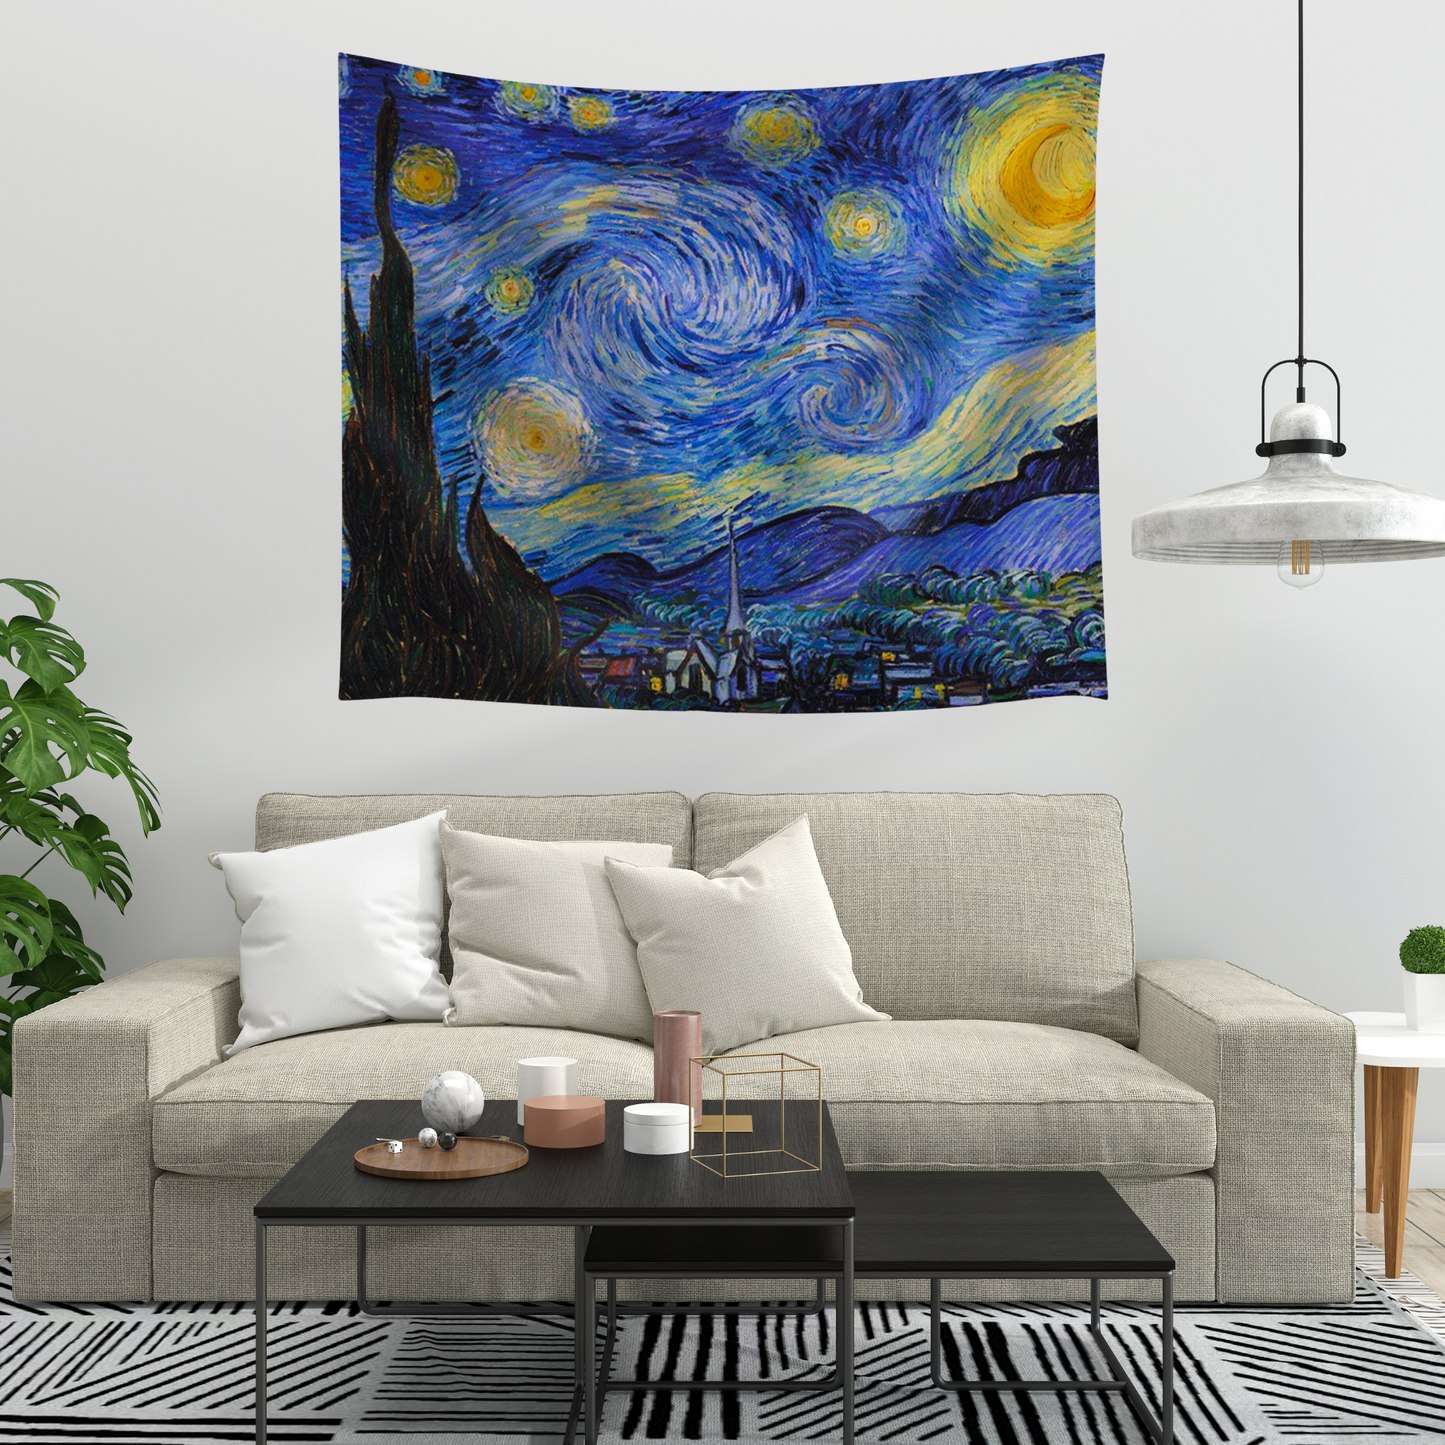 van gogh's 'The Starry Night' on a large fabric tapestry displayed on a wall.